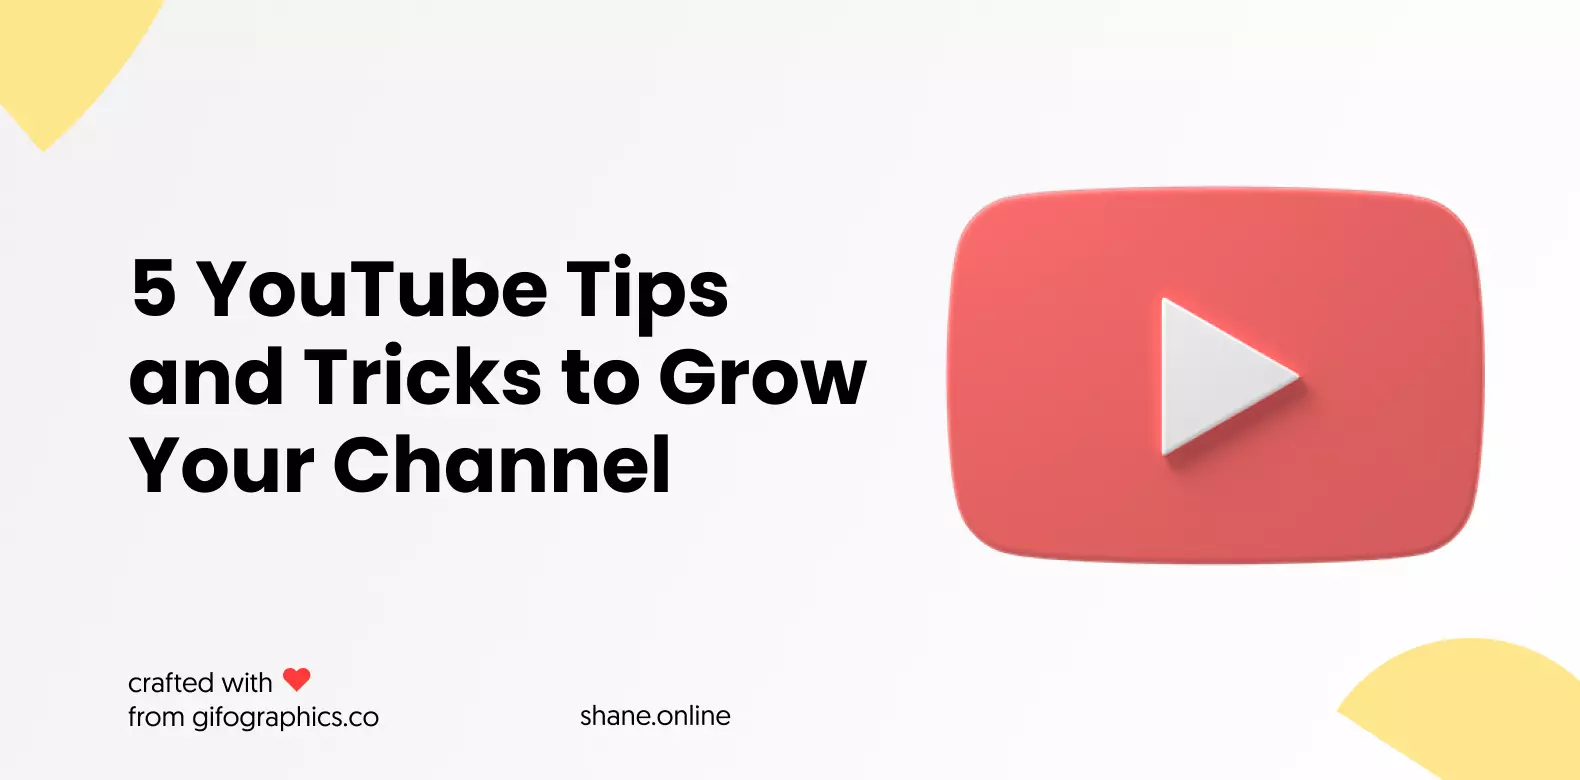 5 YouTube Tips and Tricks to Grow Your Channel